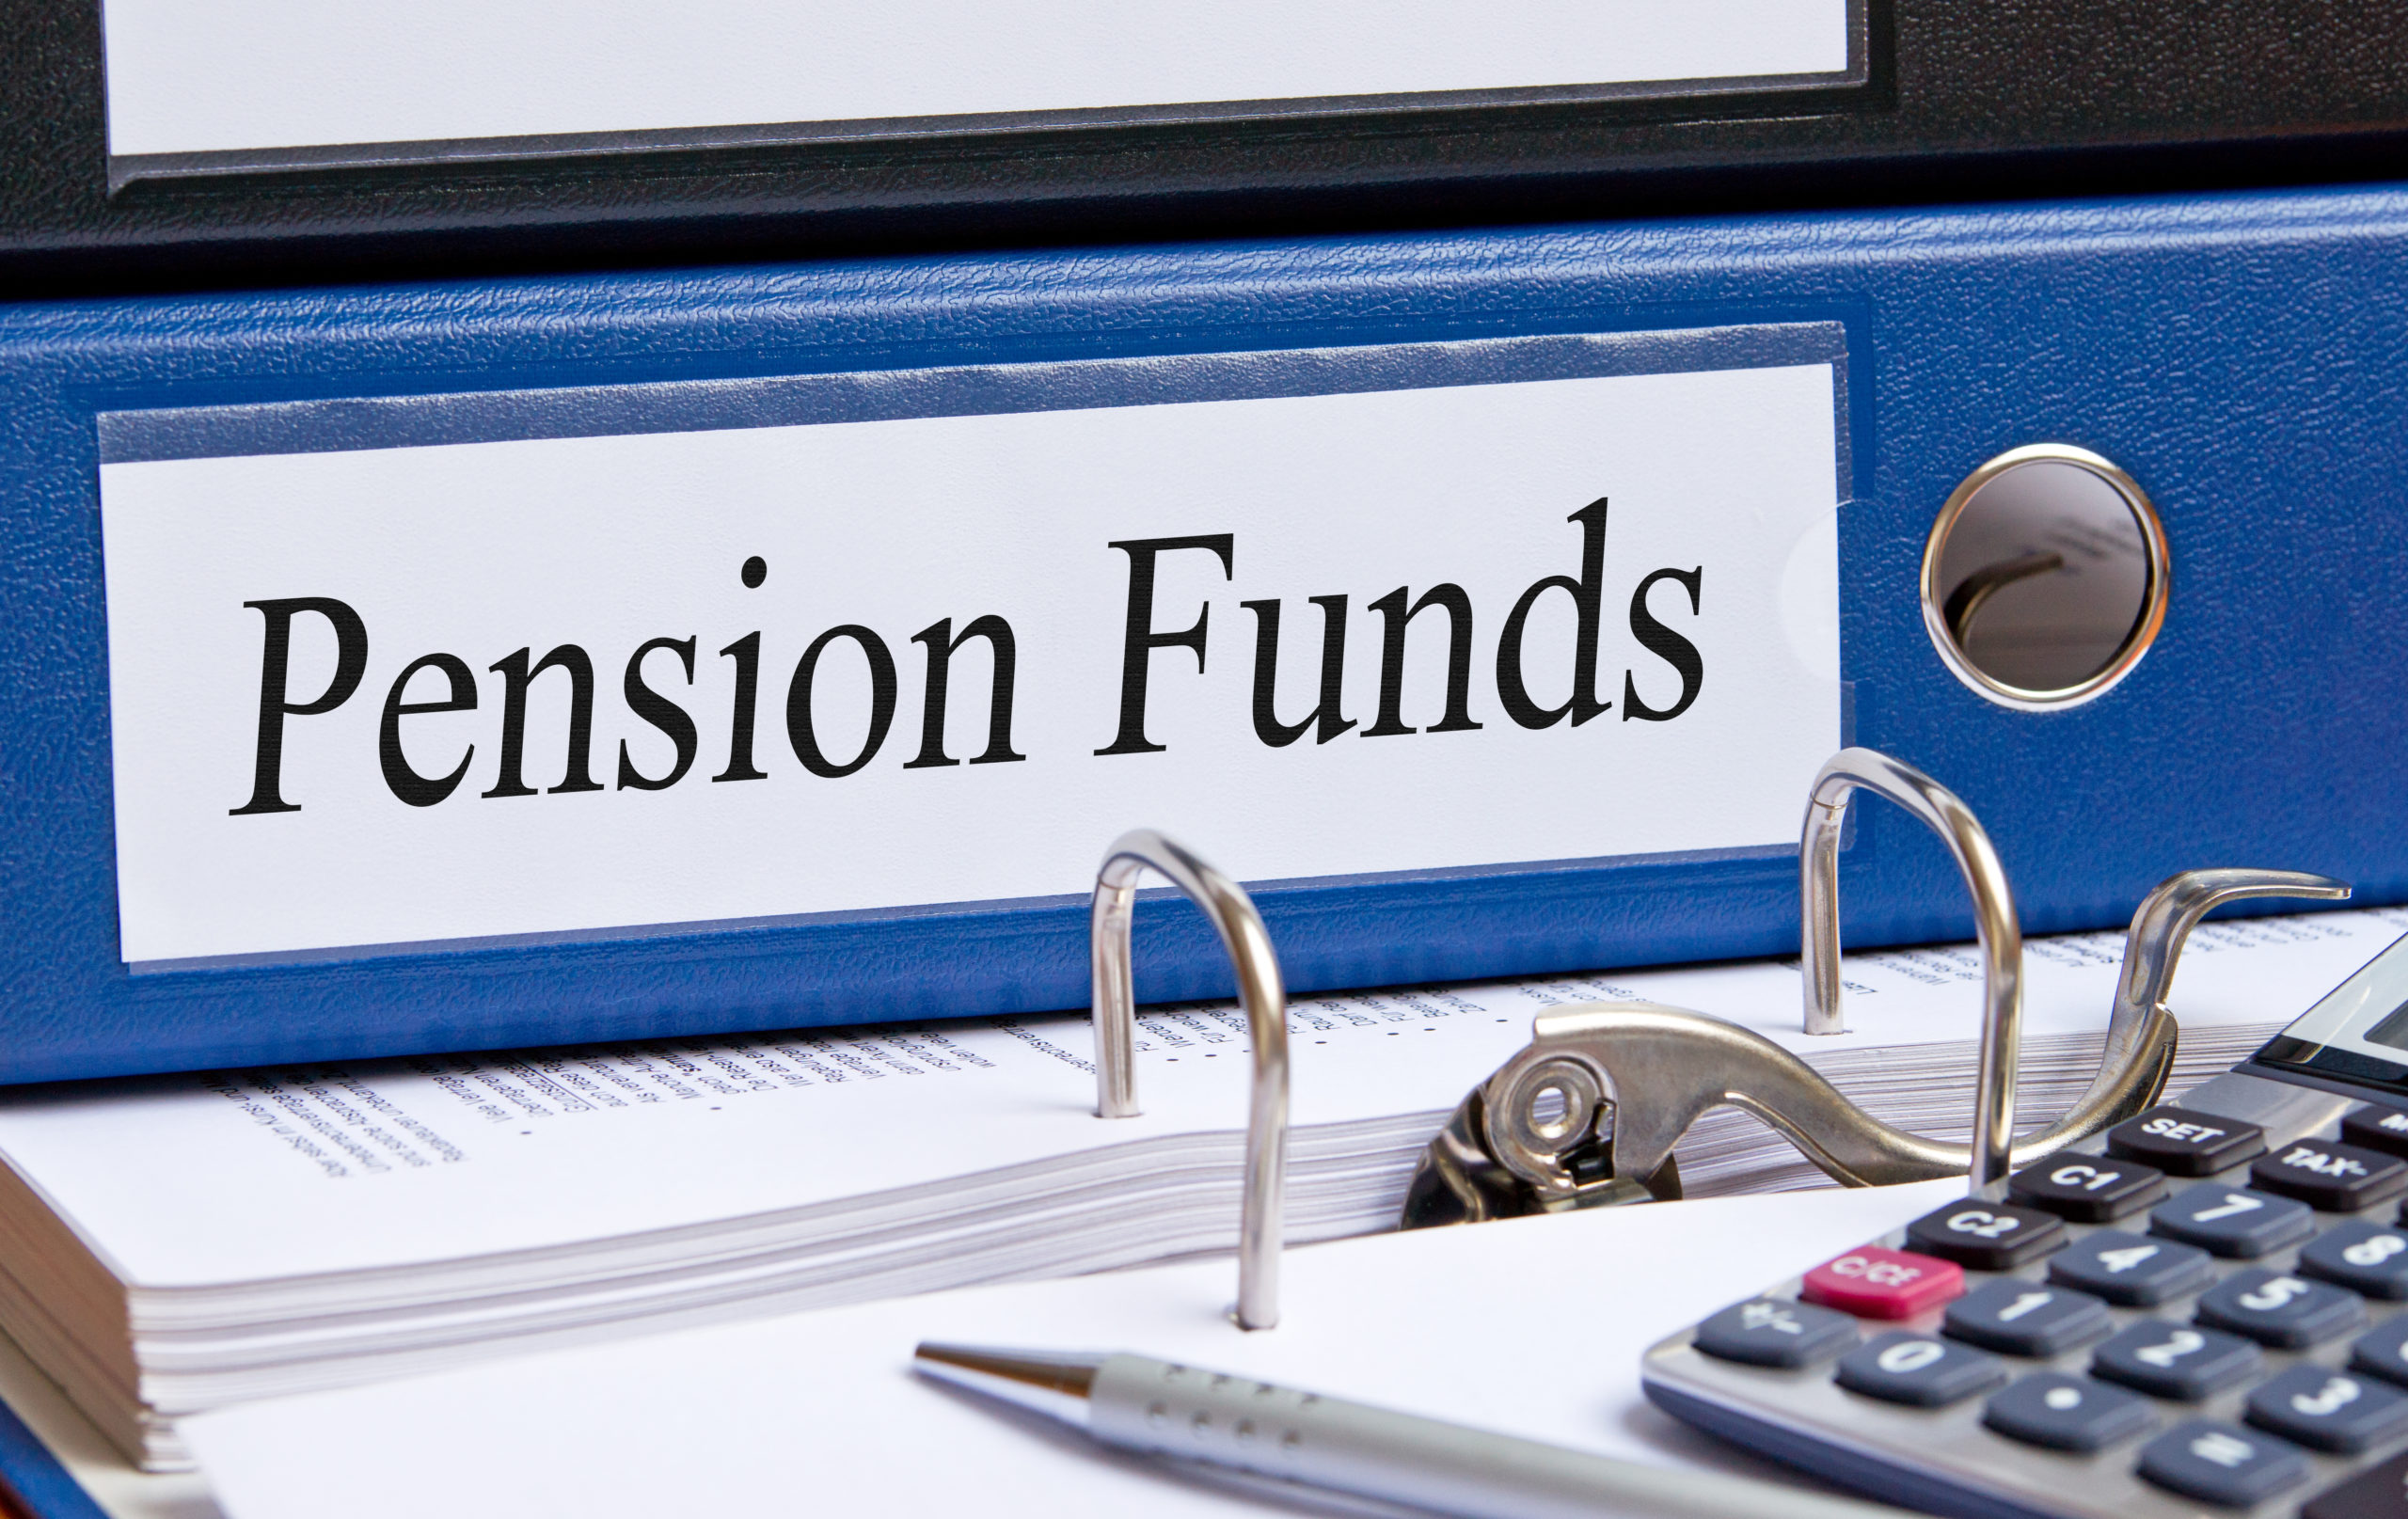 Pension Reform Newsletter: Modernizing Police Retirement Plans, Transit Agencies Strapped With Debt, and More